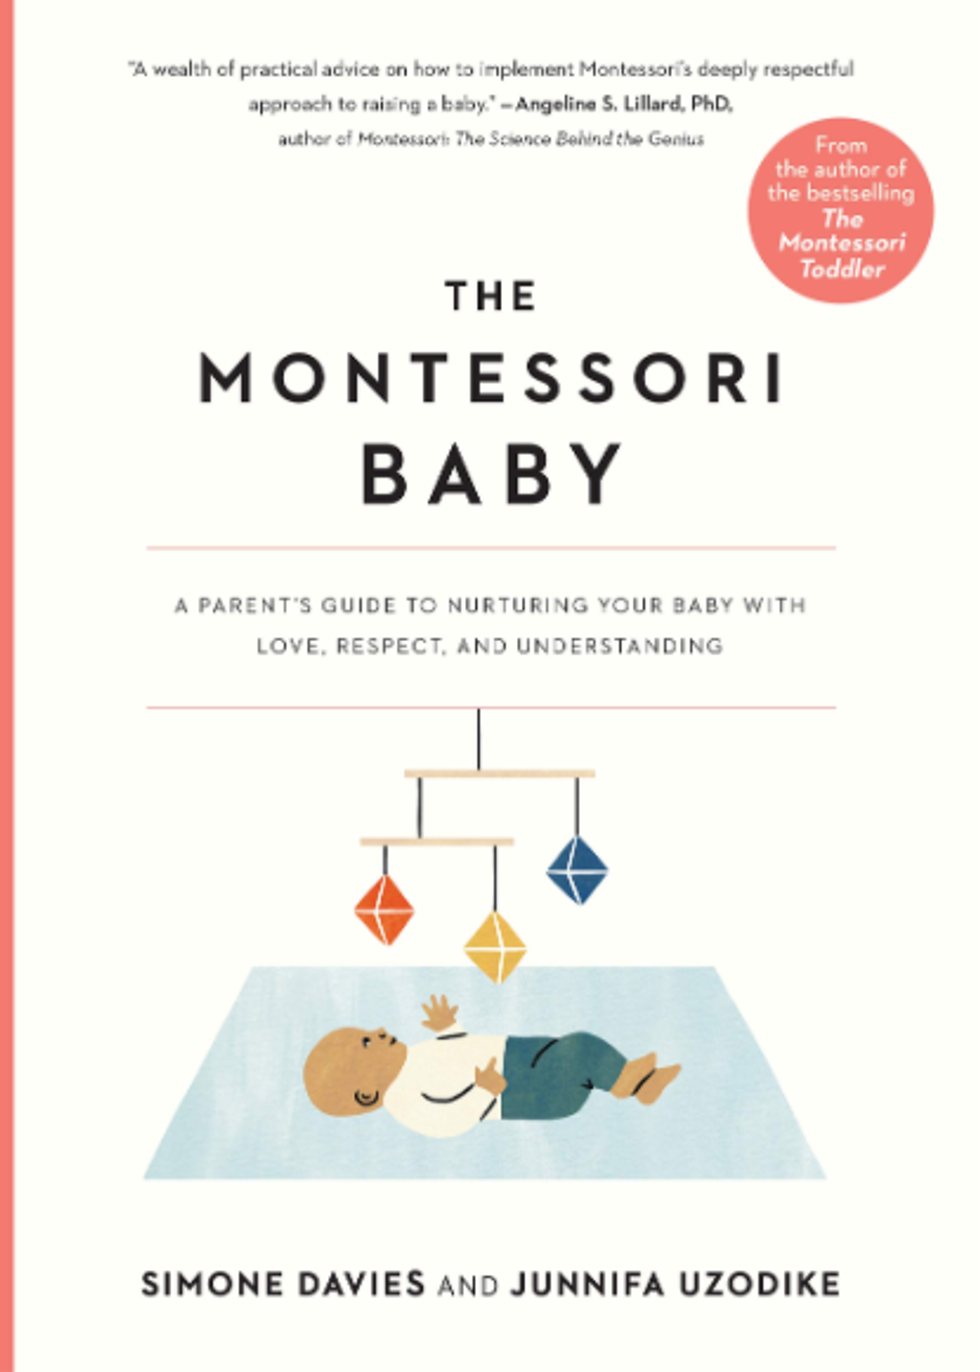 The Montessori Baby: A Parent's Guide to Nurturing Your Baby with Love, Respect and      Understanding